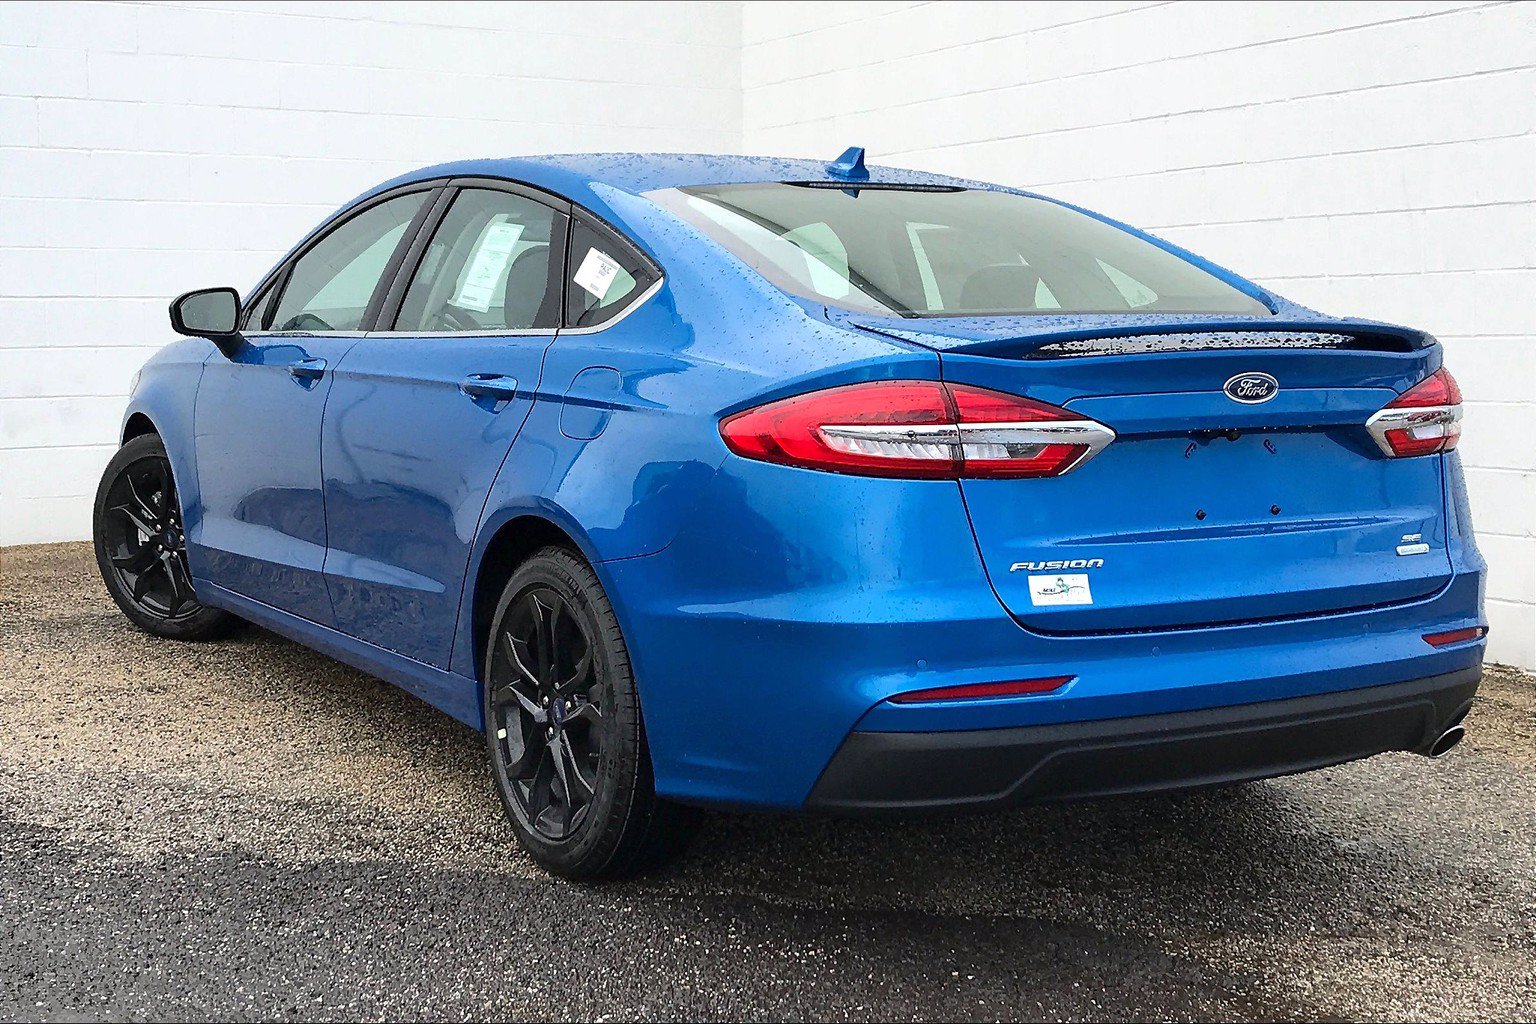 New 2020 Ford Fusion SE 4D Sedan in Morton #262030 | Mike Murphy Ford